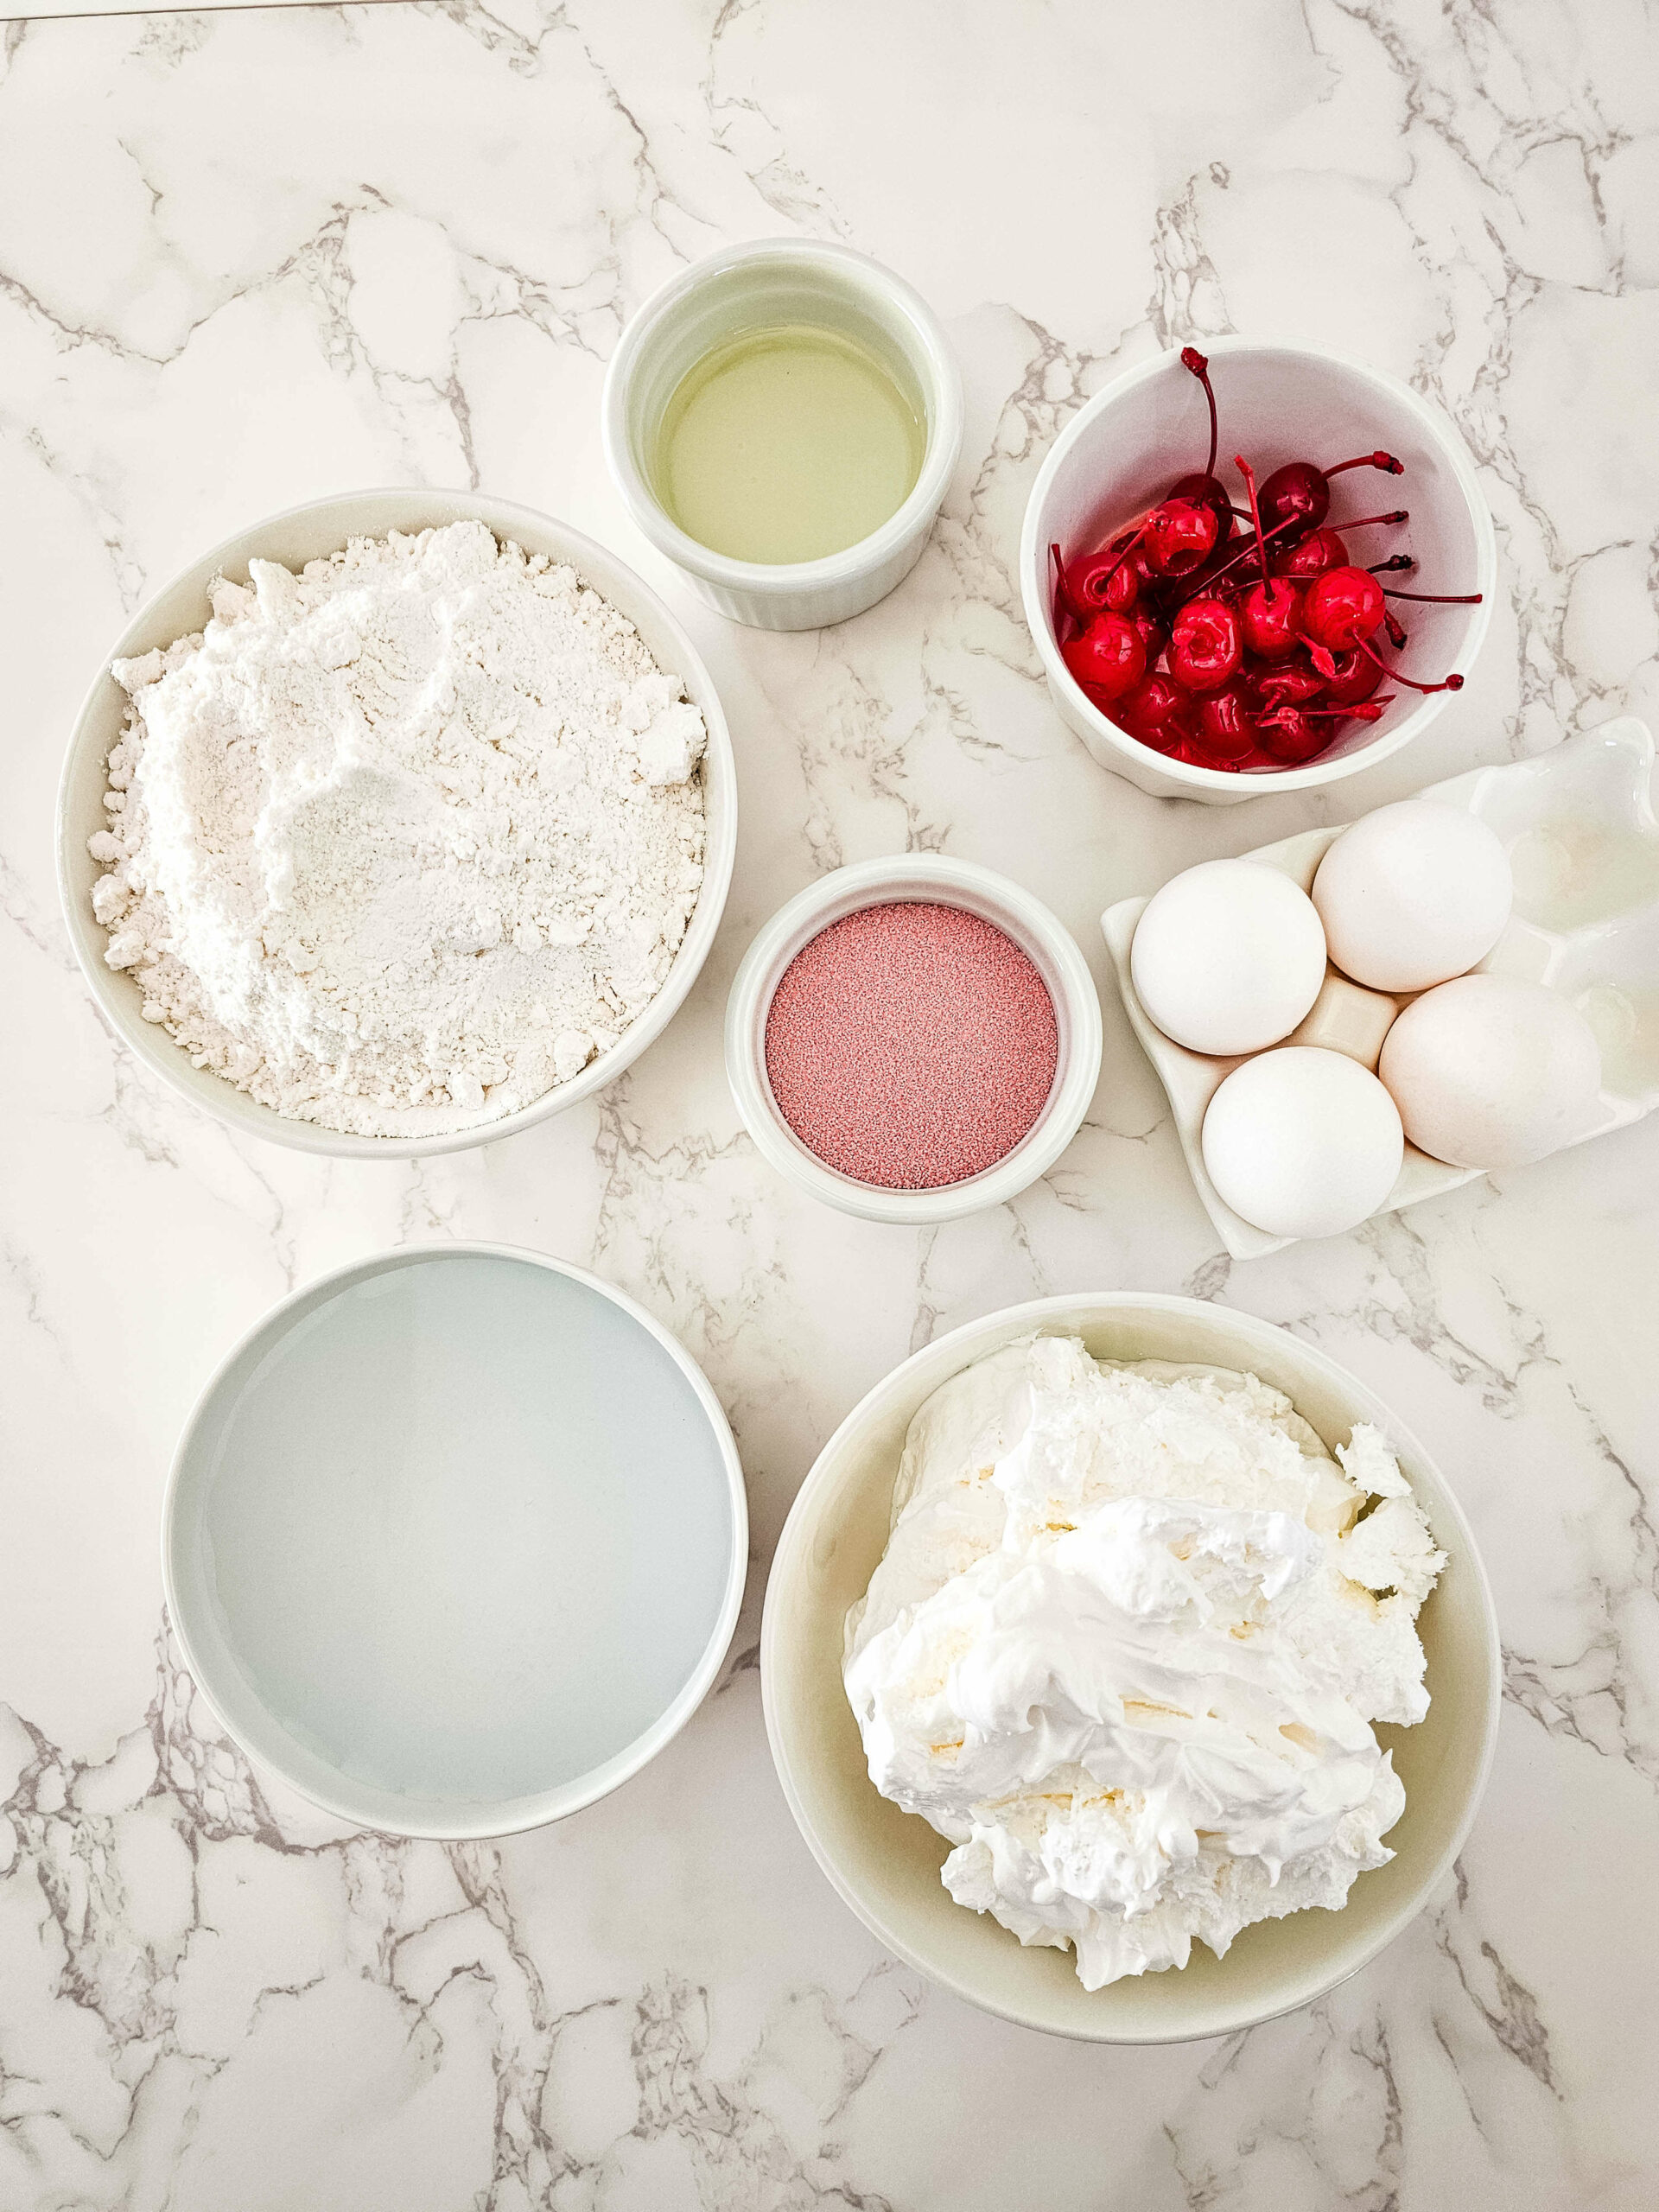 Various ingredients for the dessert arranged on a marble surface, including flour, eggs, cherries, oil, and whipped cream.